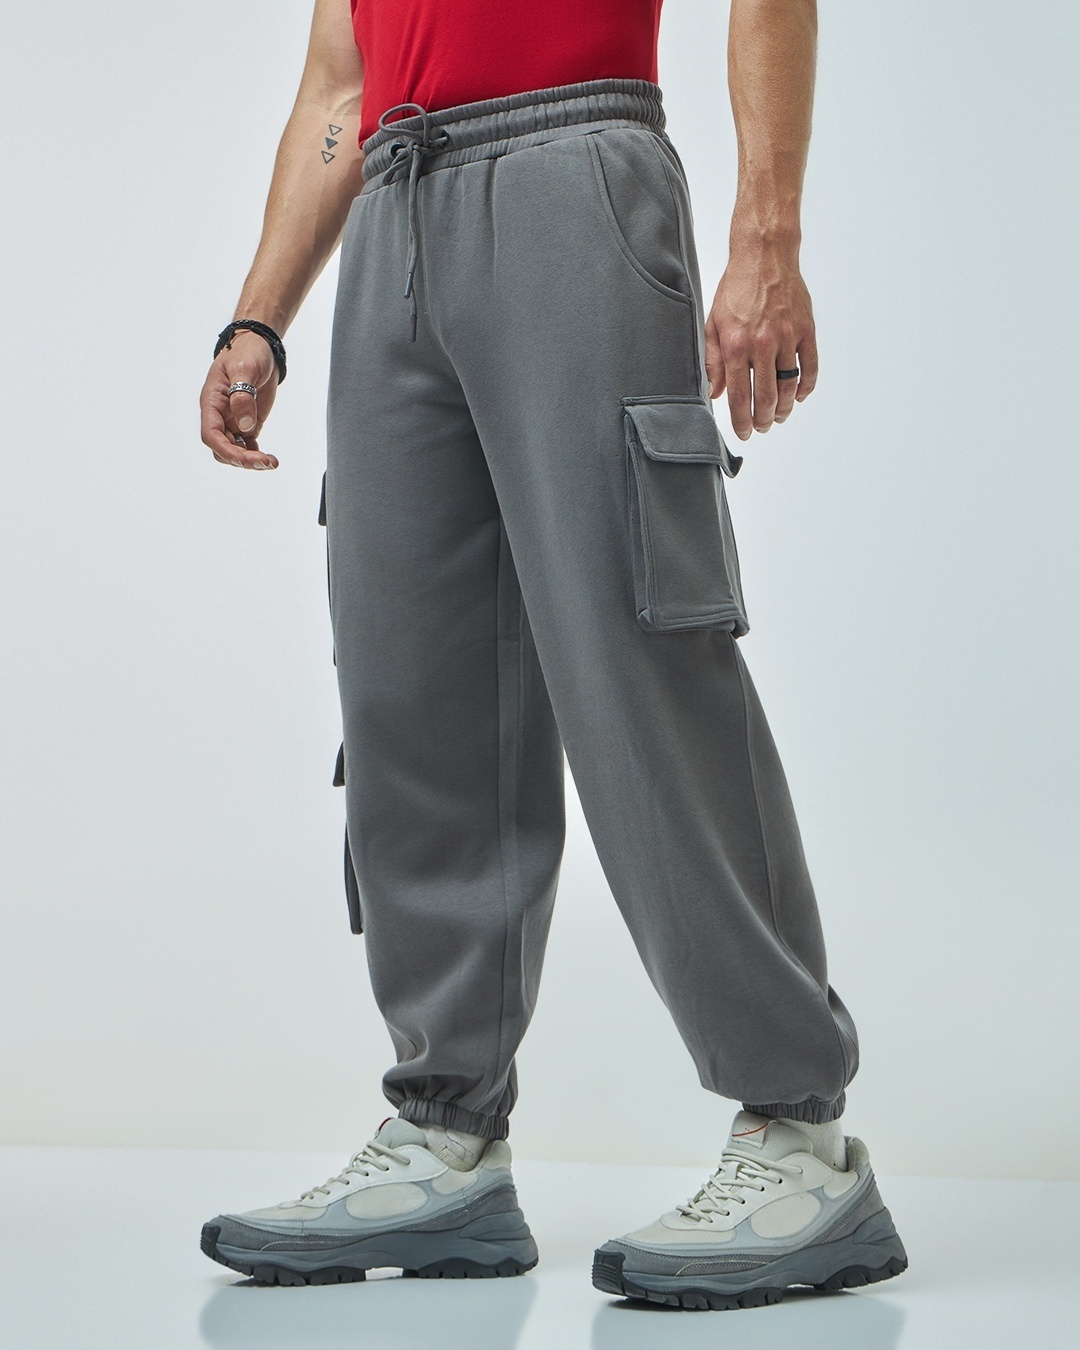 qolati Baggy Cargo Pants for Men Plus Size Casual Joggers Athletic Hiking Pants  Loose Fit Outdoor Relaxed Work Trousers - Walmart.com